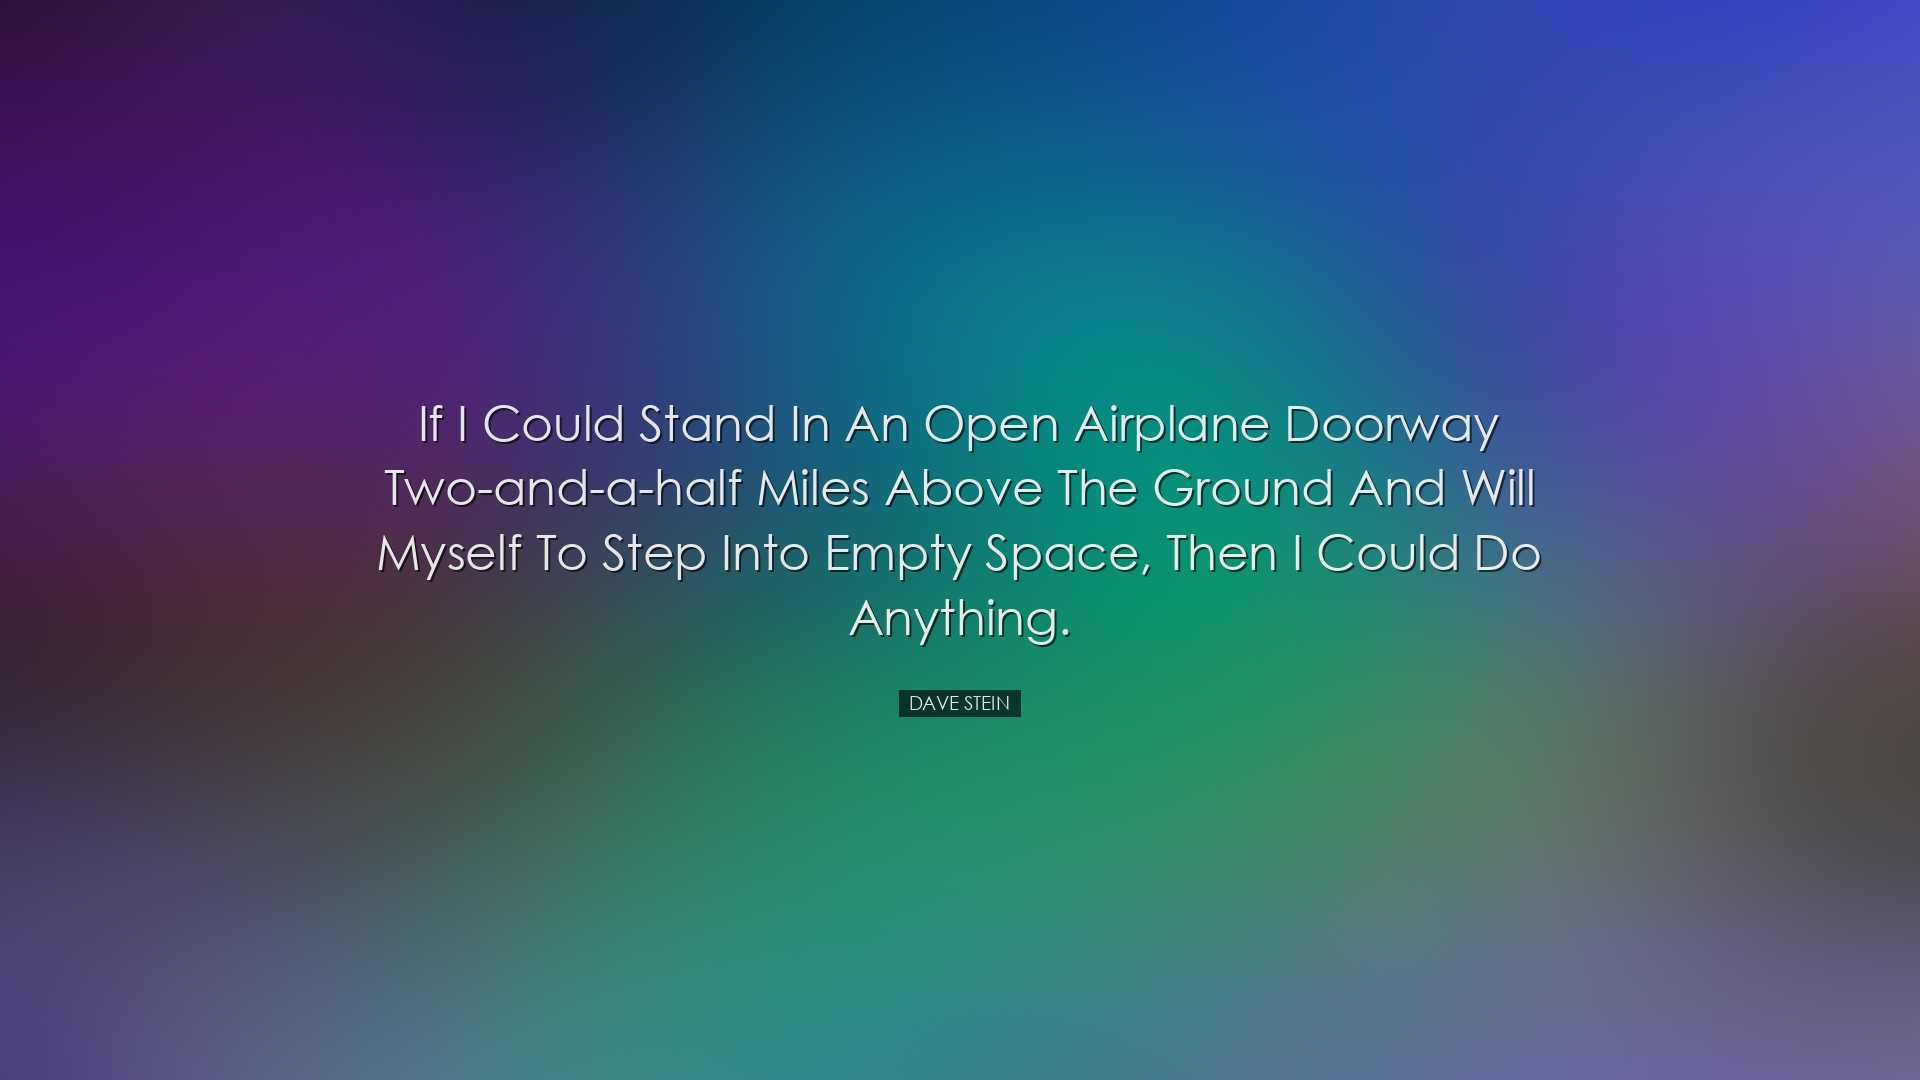 If I could stand in an open airplane doorway two-and-a-half miles